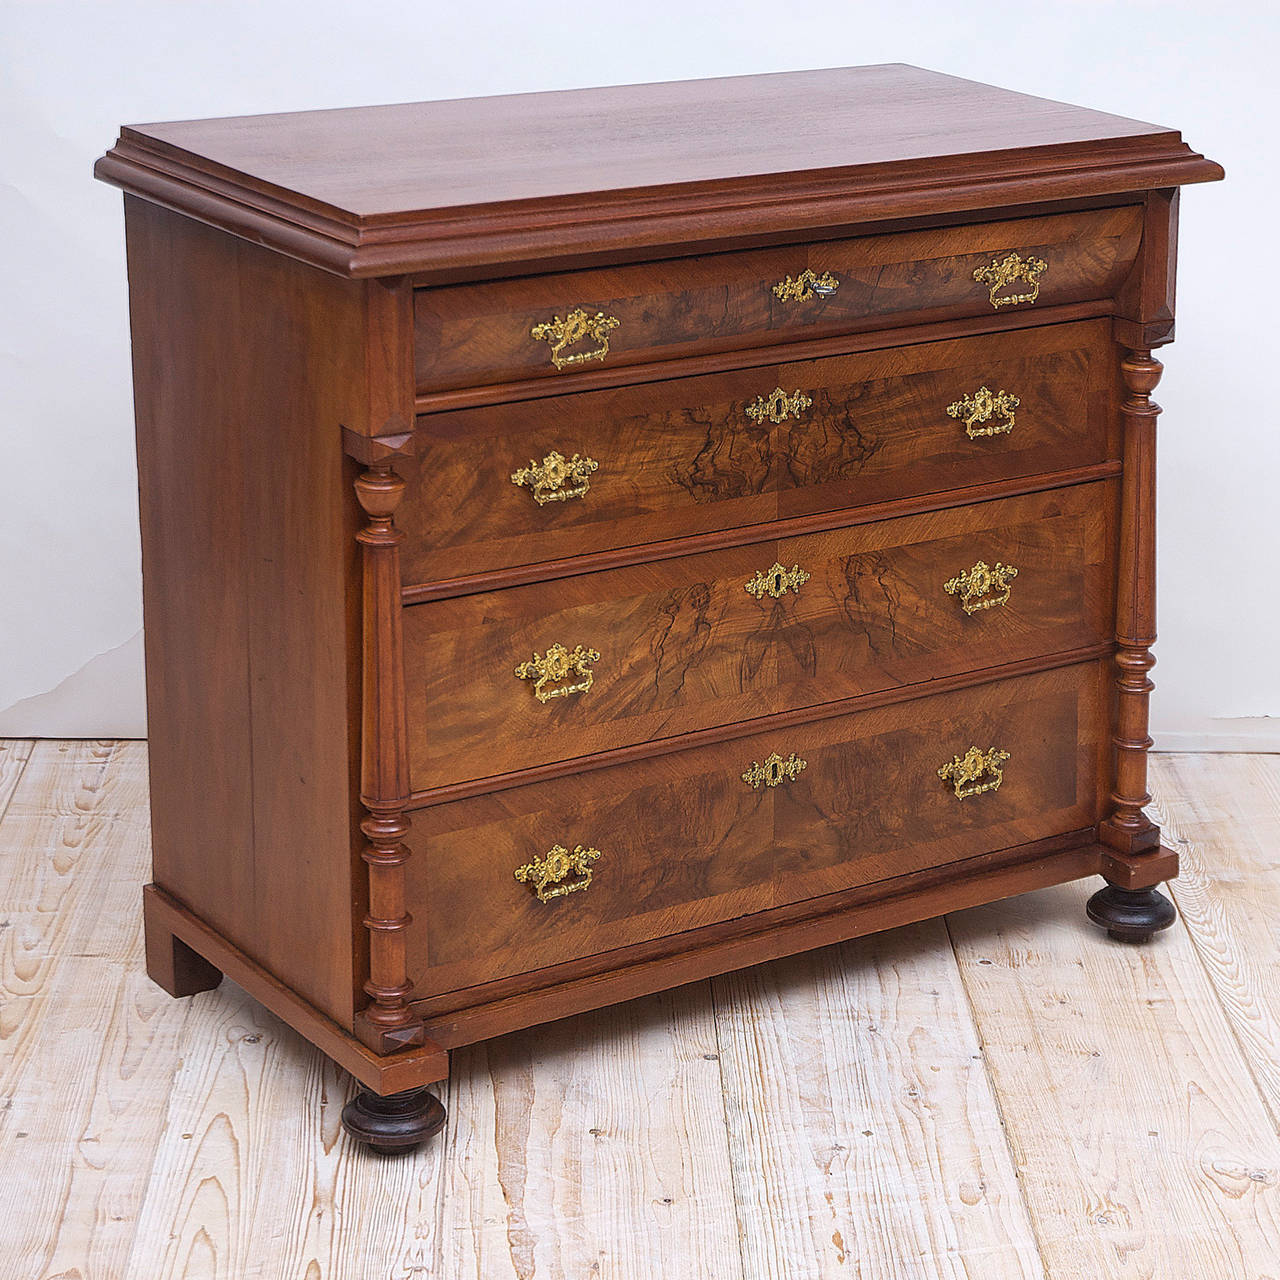 A chest with four drawers in figured walnut, with turned fluted columns and original bun feet. Top drawer has convex front with interior, sliding pine drawer covers. Features original brass pulls and key plates, working locks, and one key. From the